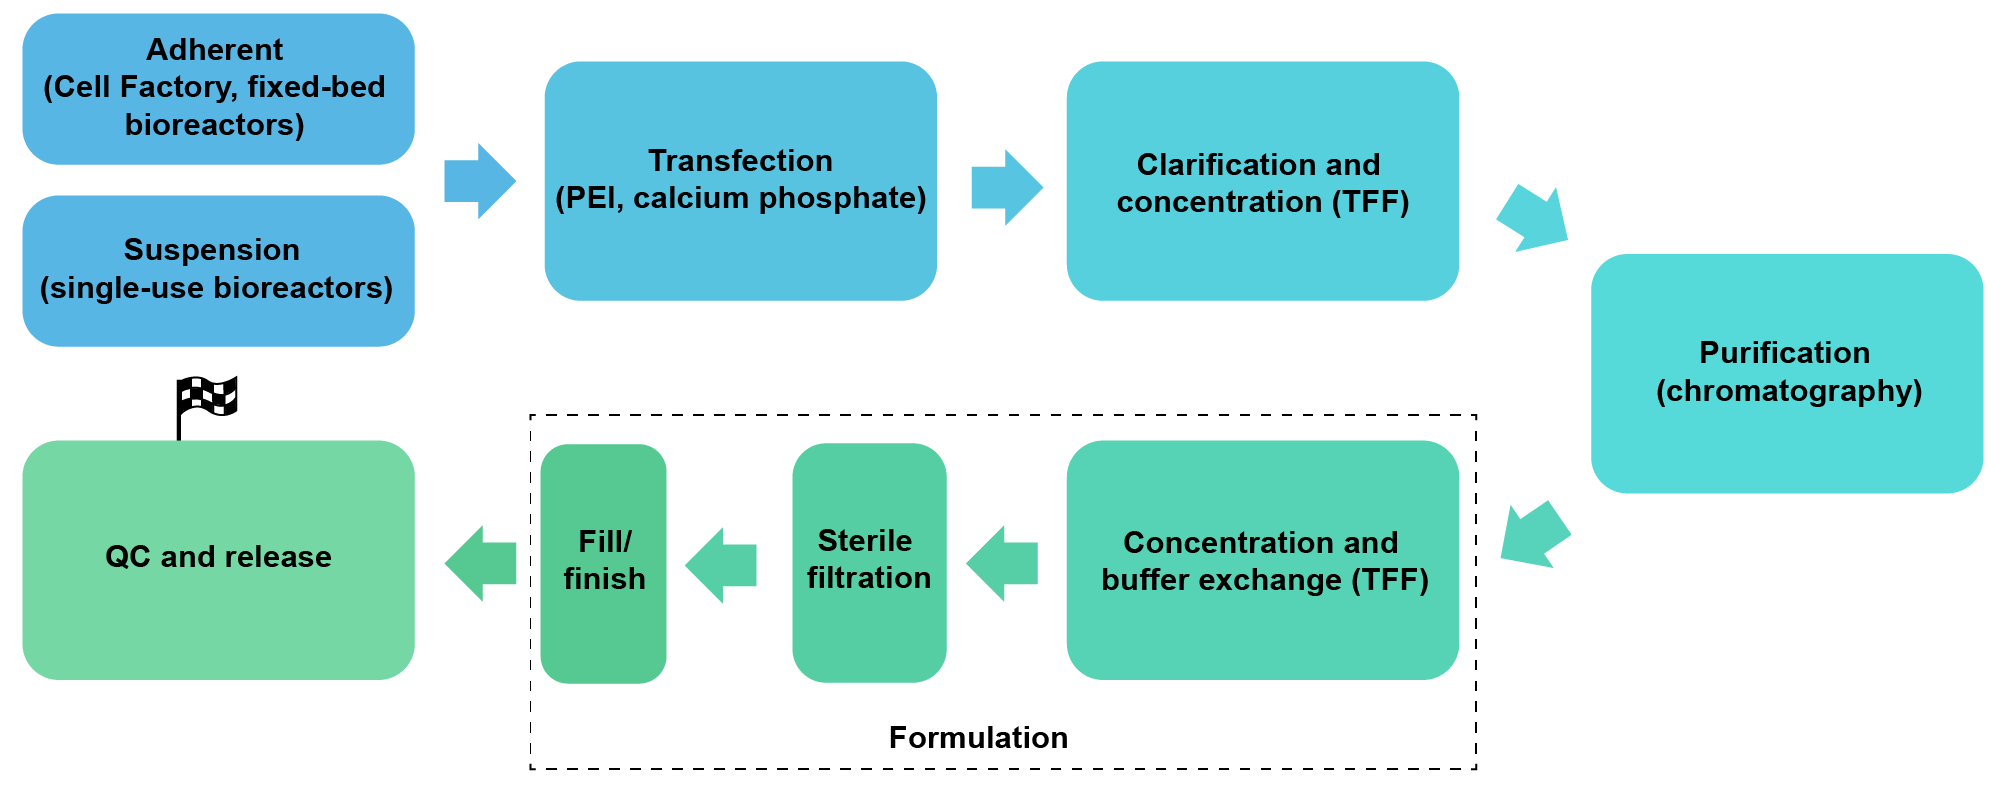 Adherent/Suspension > Transfection > Clarification and concentration (TFF) > Purification > Formulation > QC.